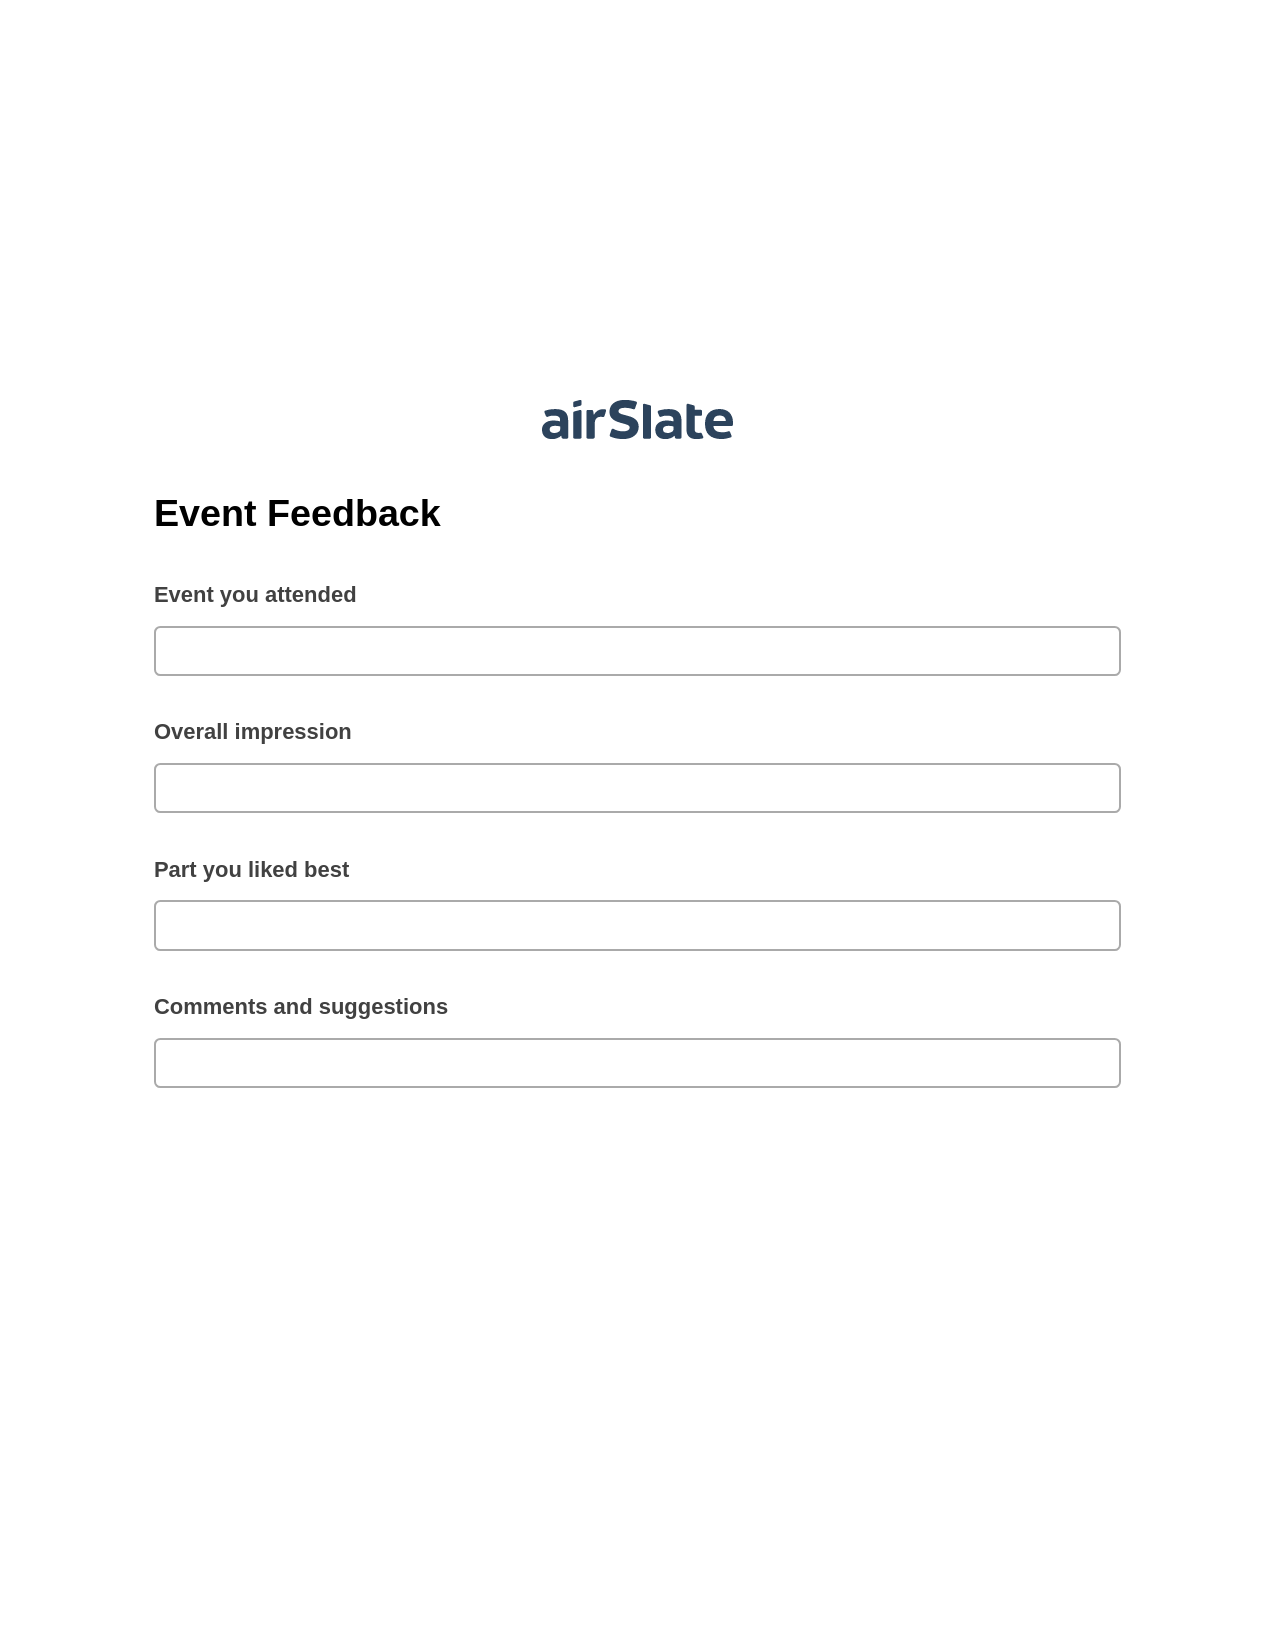 Event Feedback Pre-fill Dropdown from Airtable, Update MS Dynamics 365 Records Bot, Export to NetSuite Record Bot